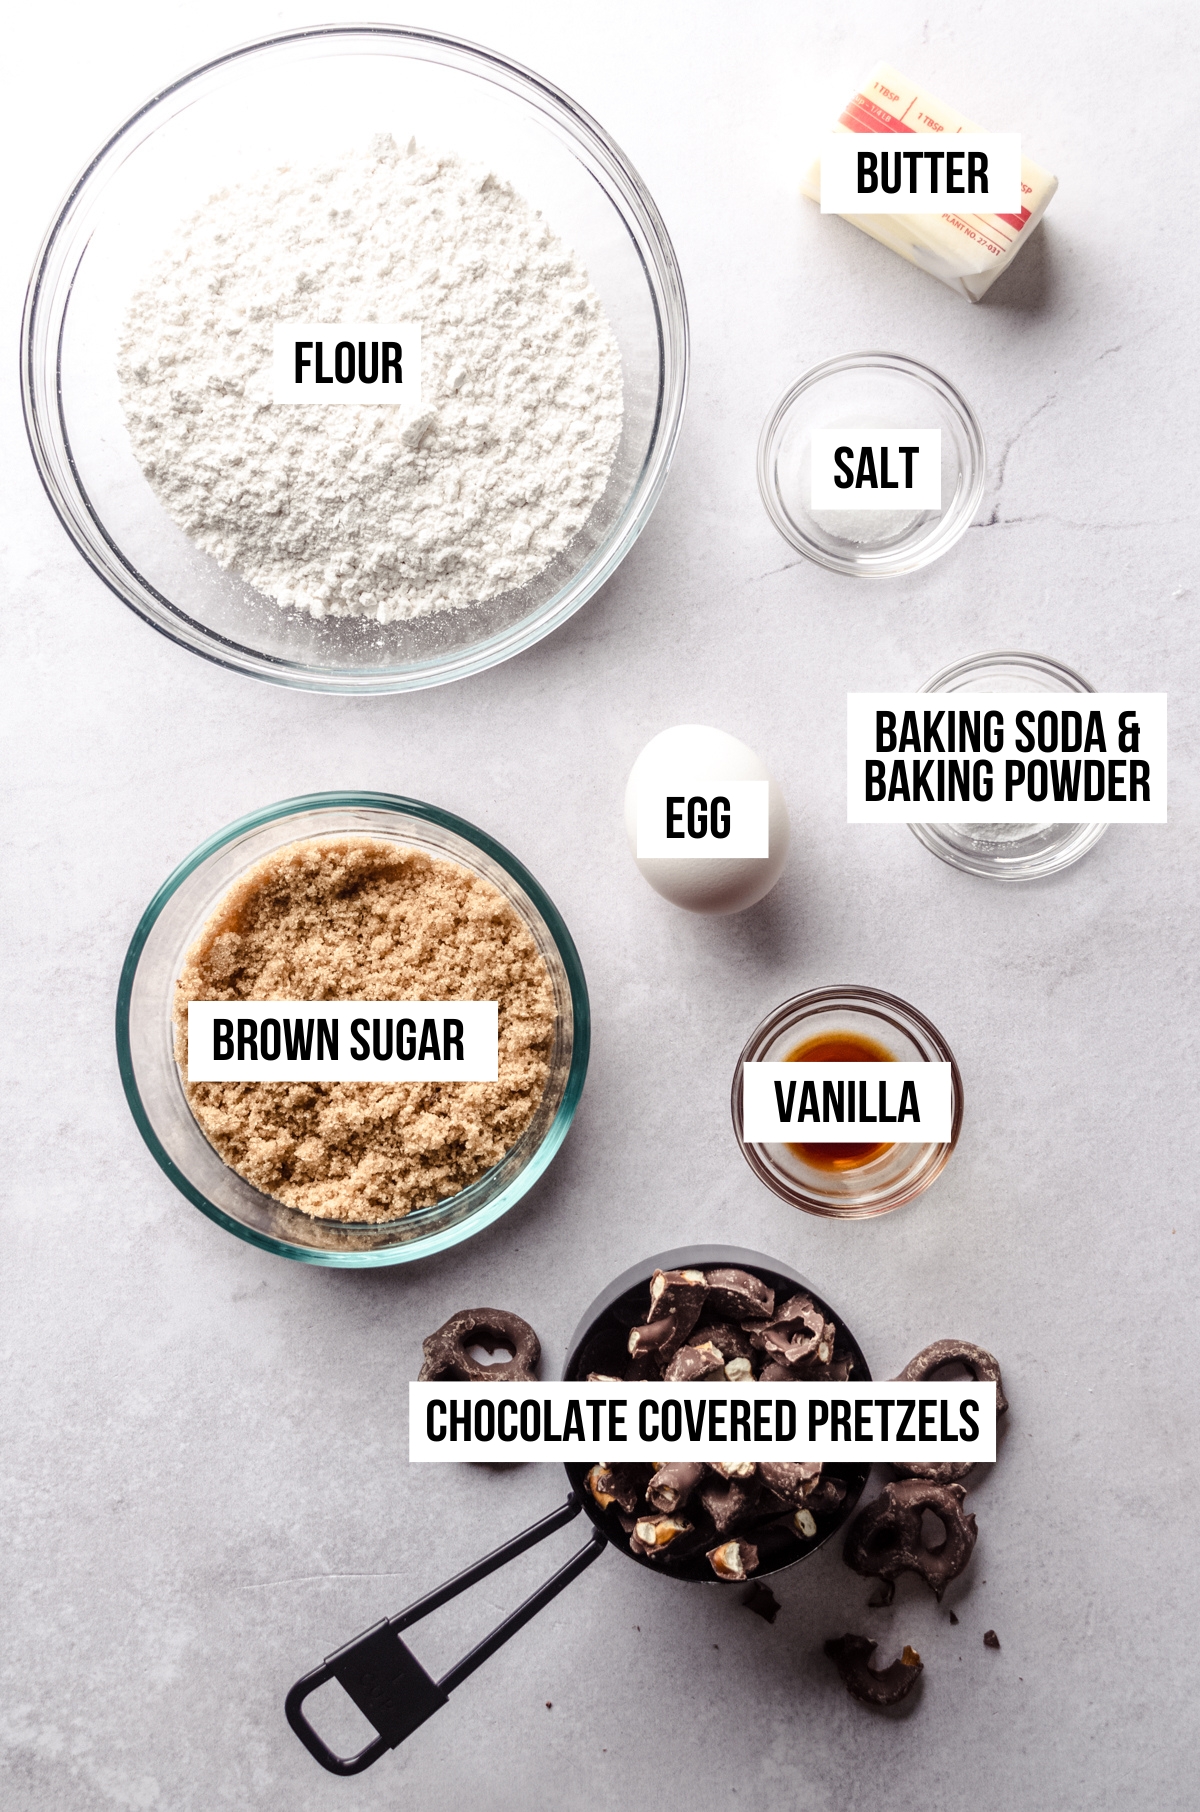 Aerial photo of ingredients for chocolate covered pretzel cookies with text overlay.